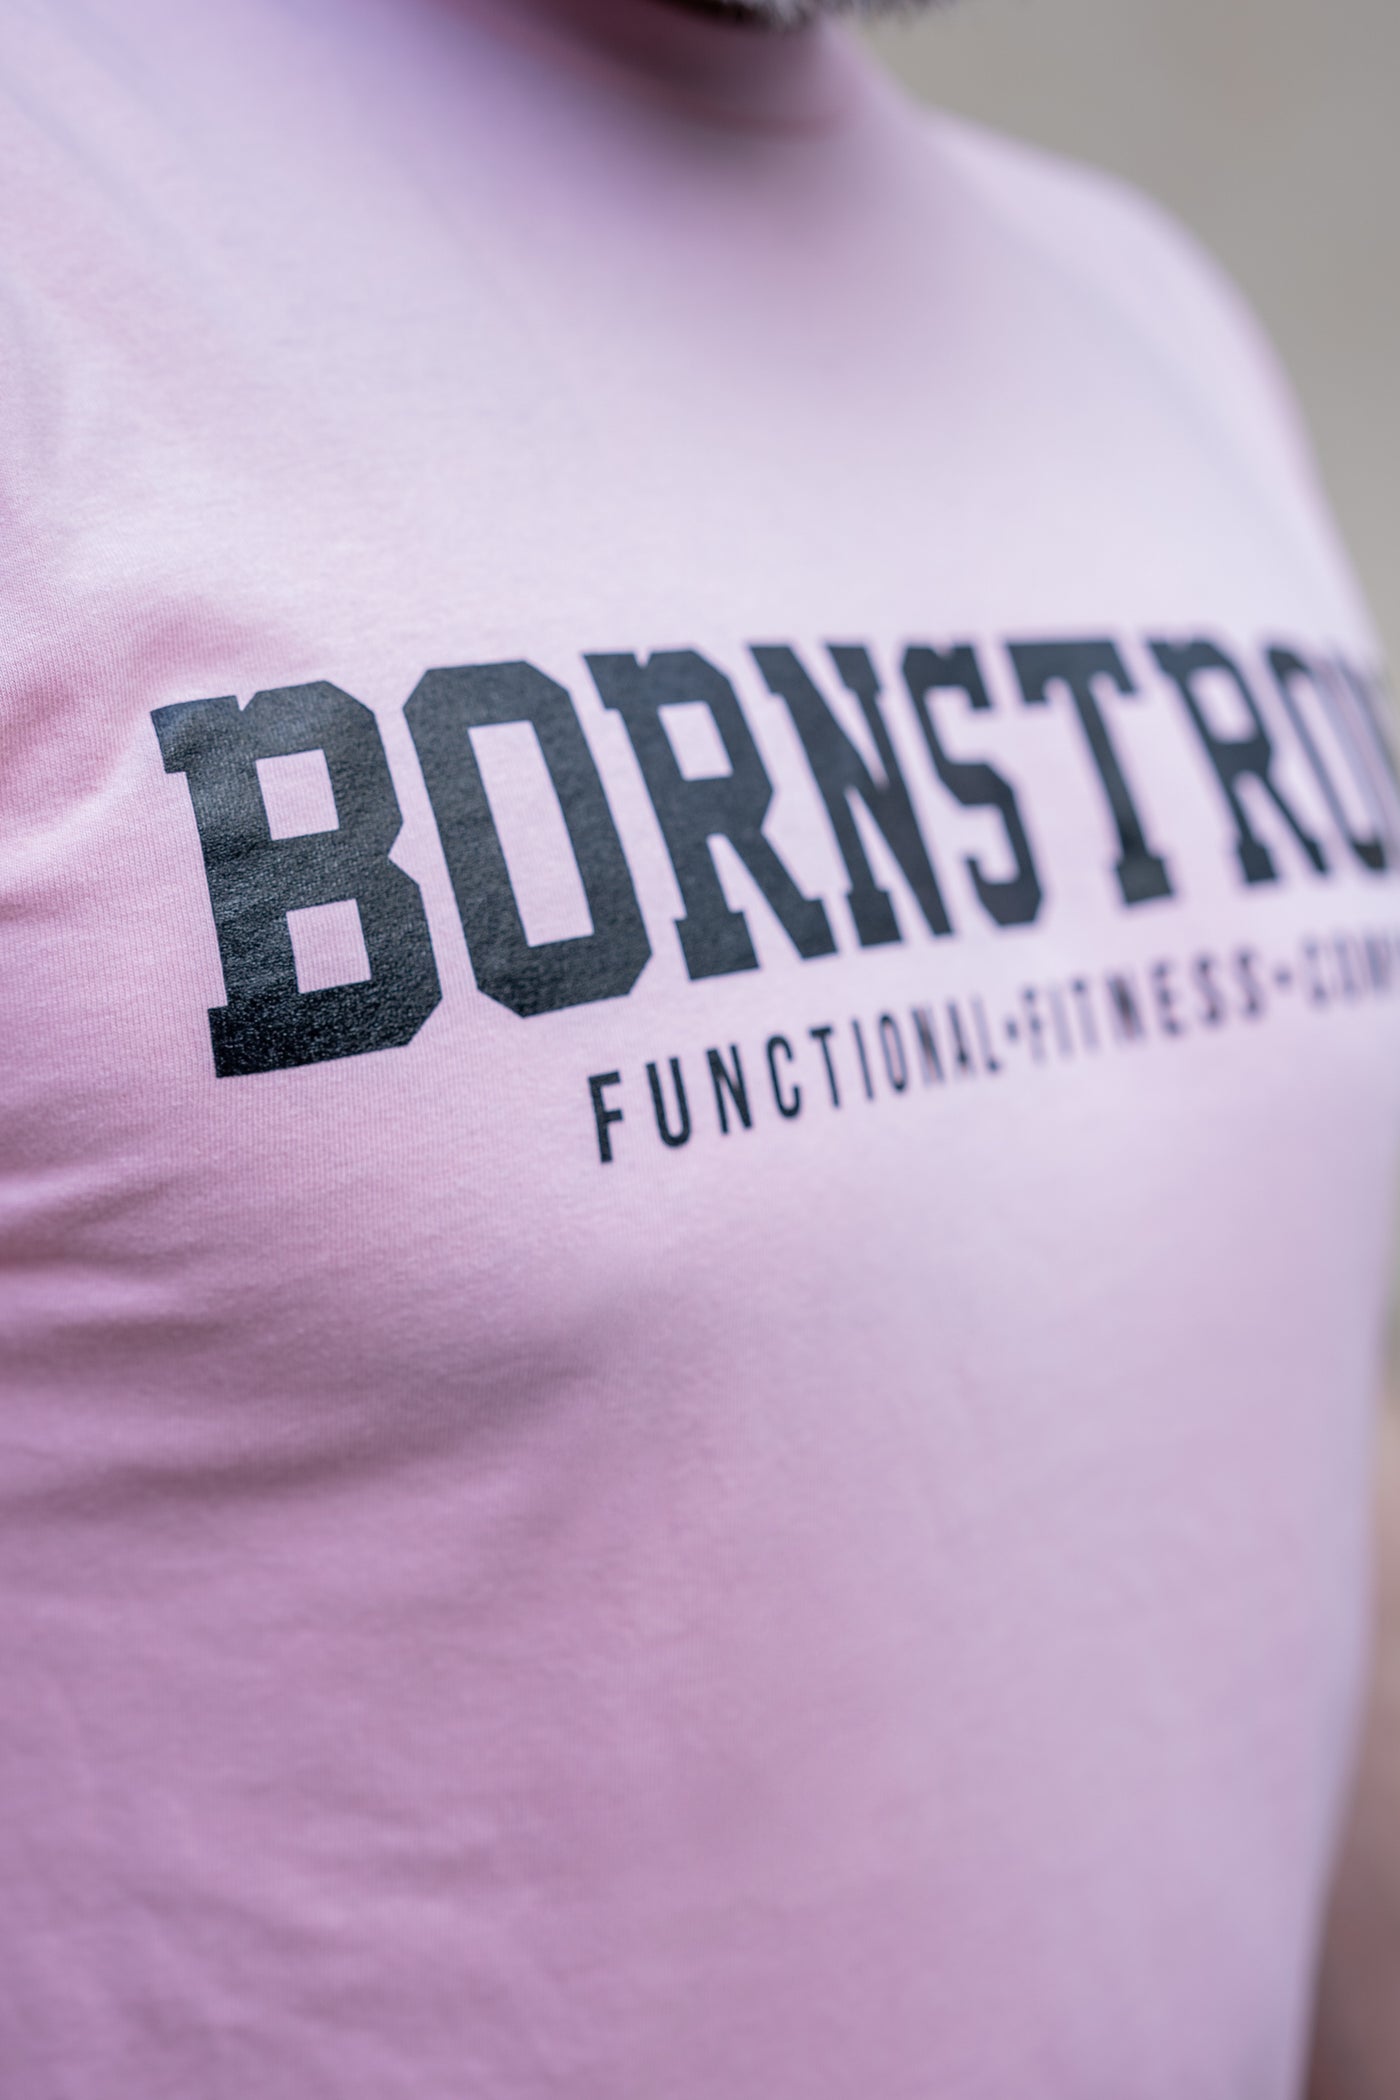 T-shirt BORN STRONG FUNCTIONAL FITNESS COMPANY